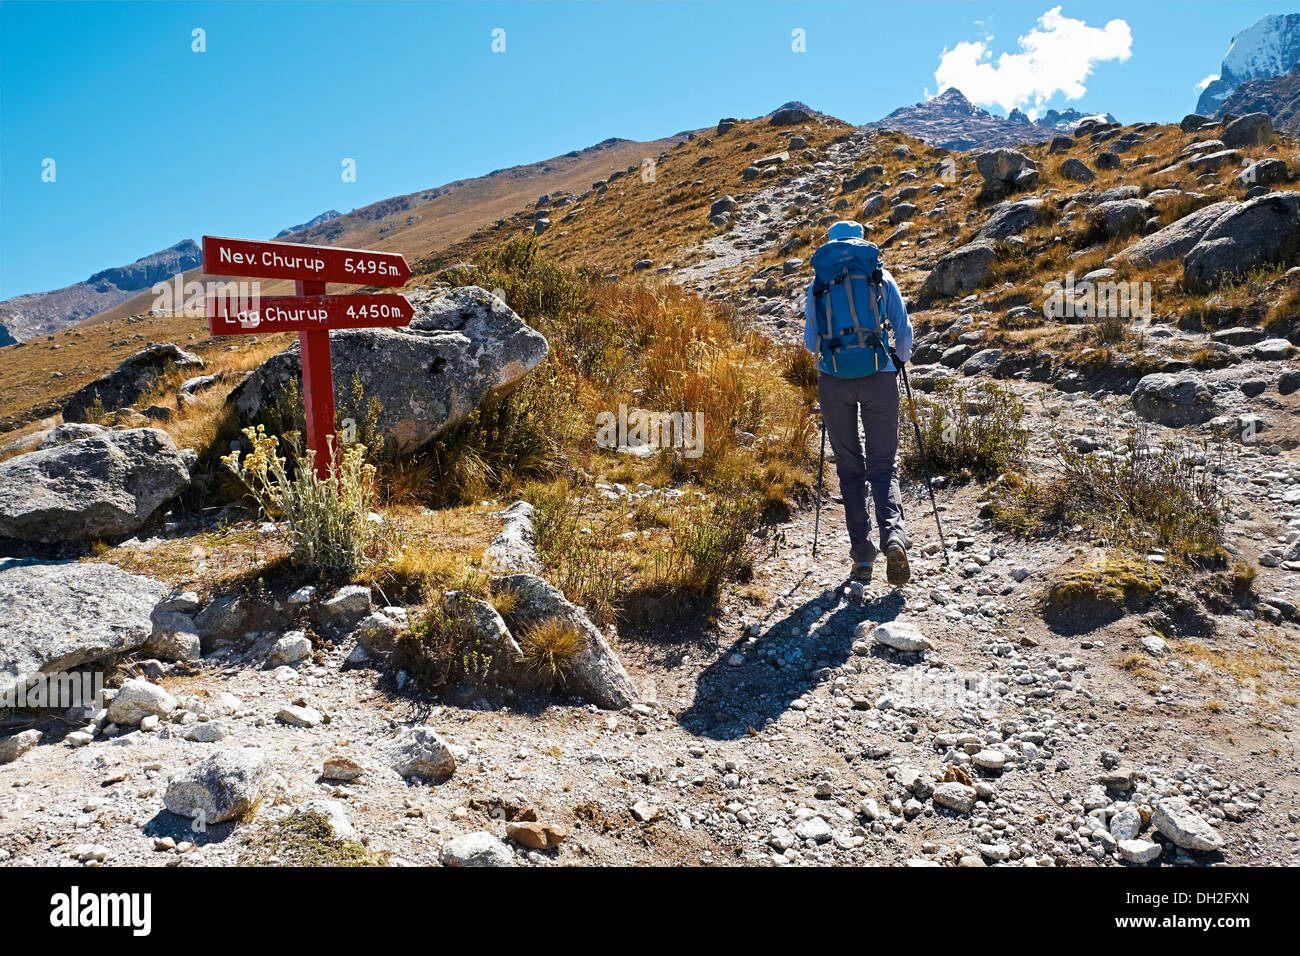 A hiker climbing Nev Churup trail, Huascaran National Park in the Andes, South America. Stock Photo